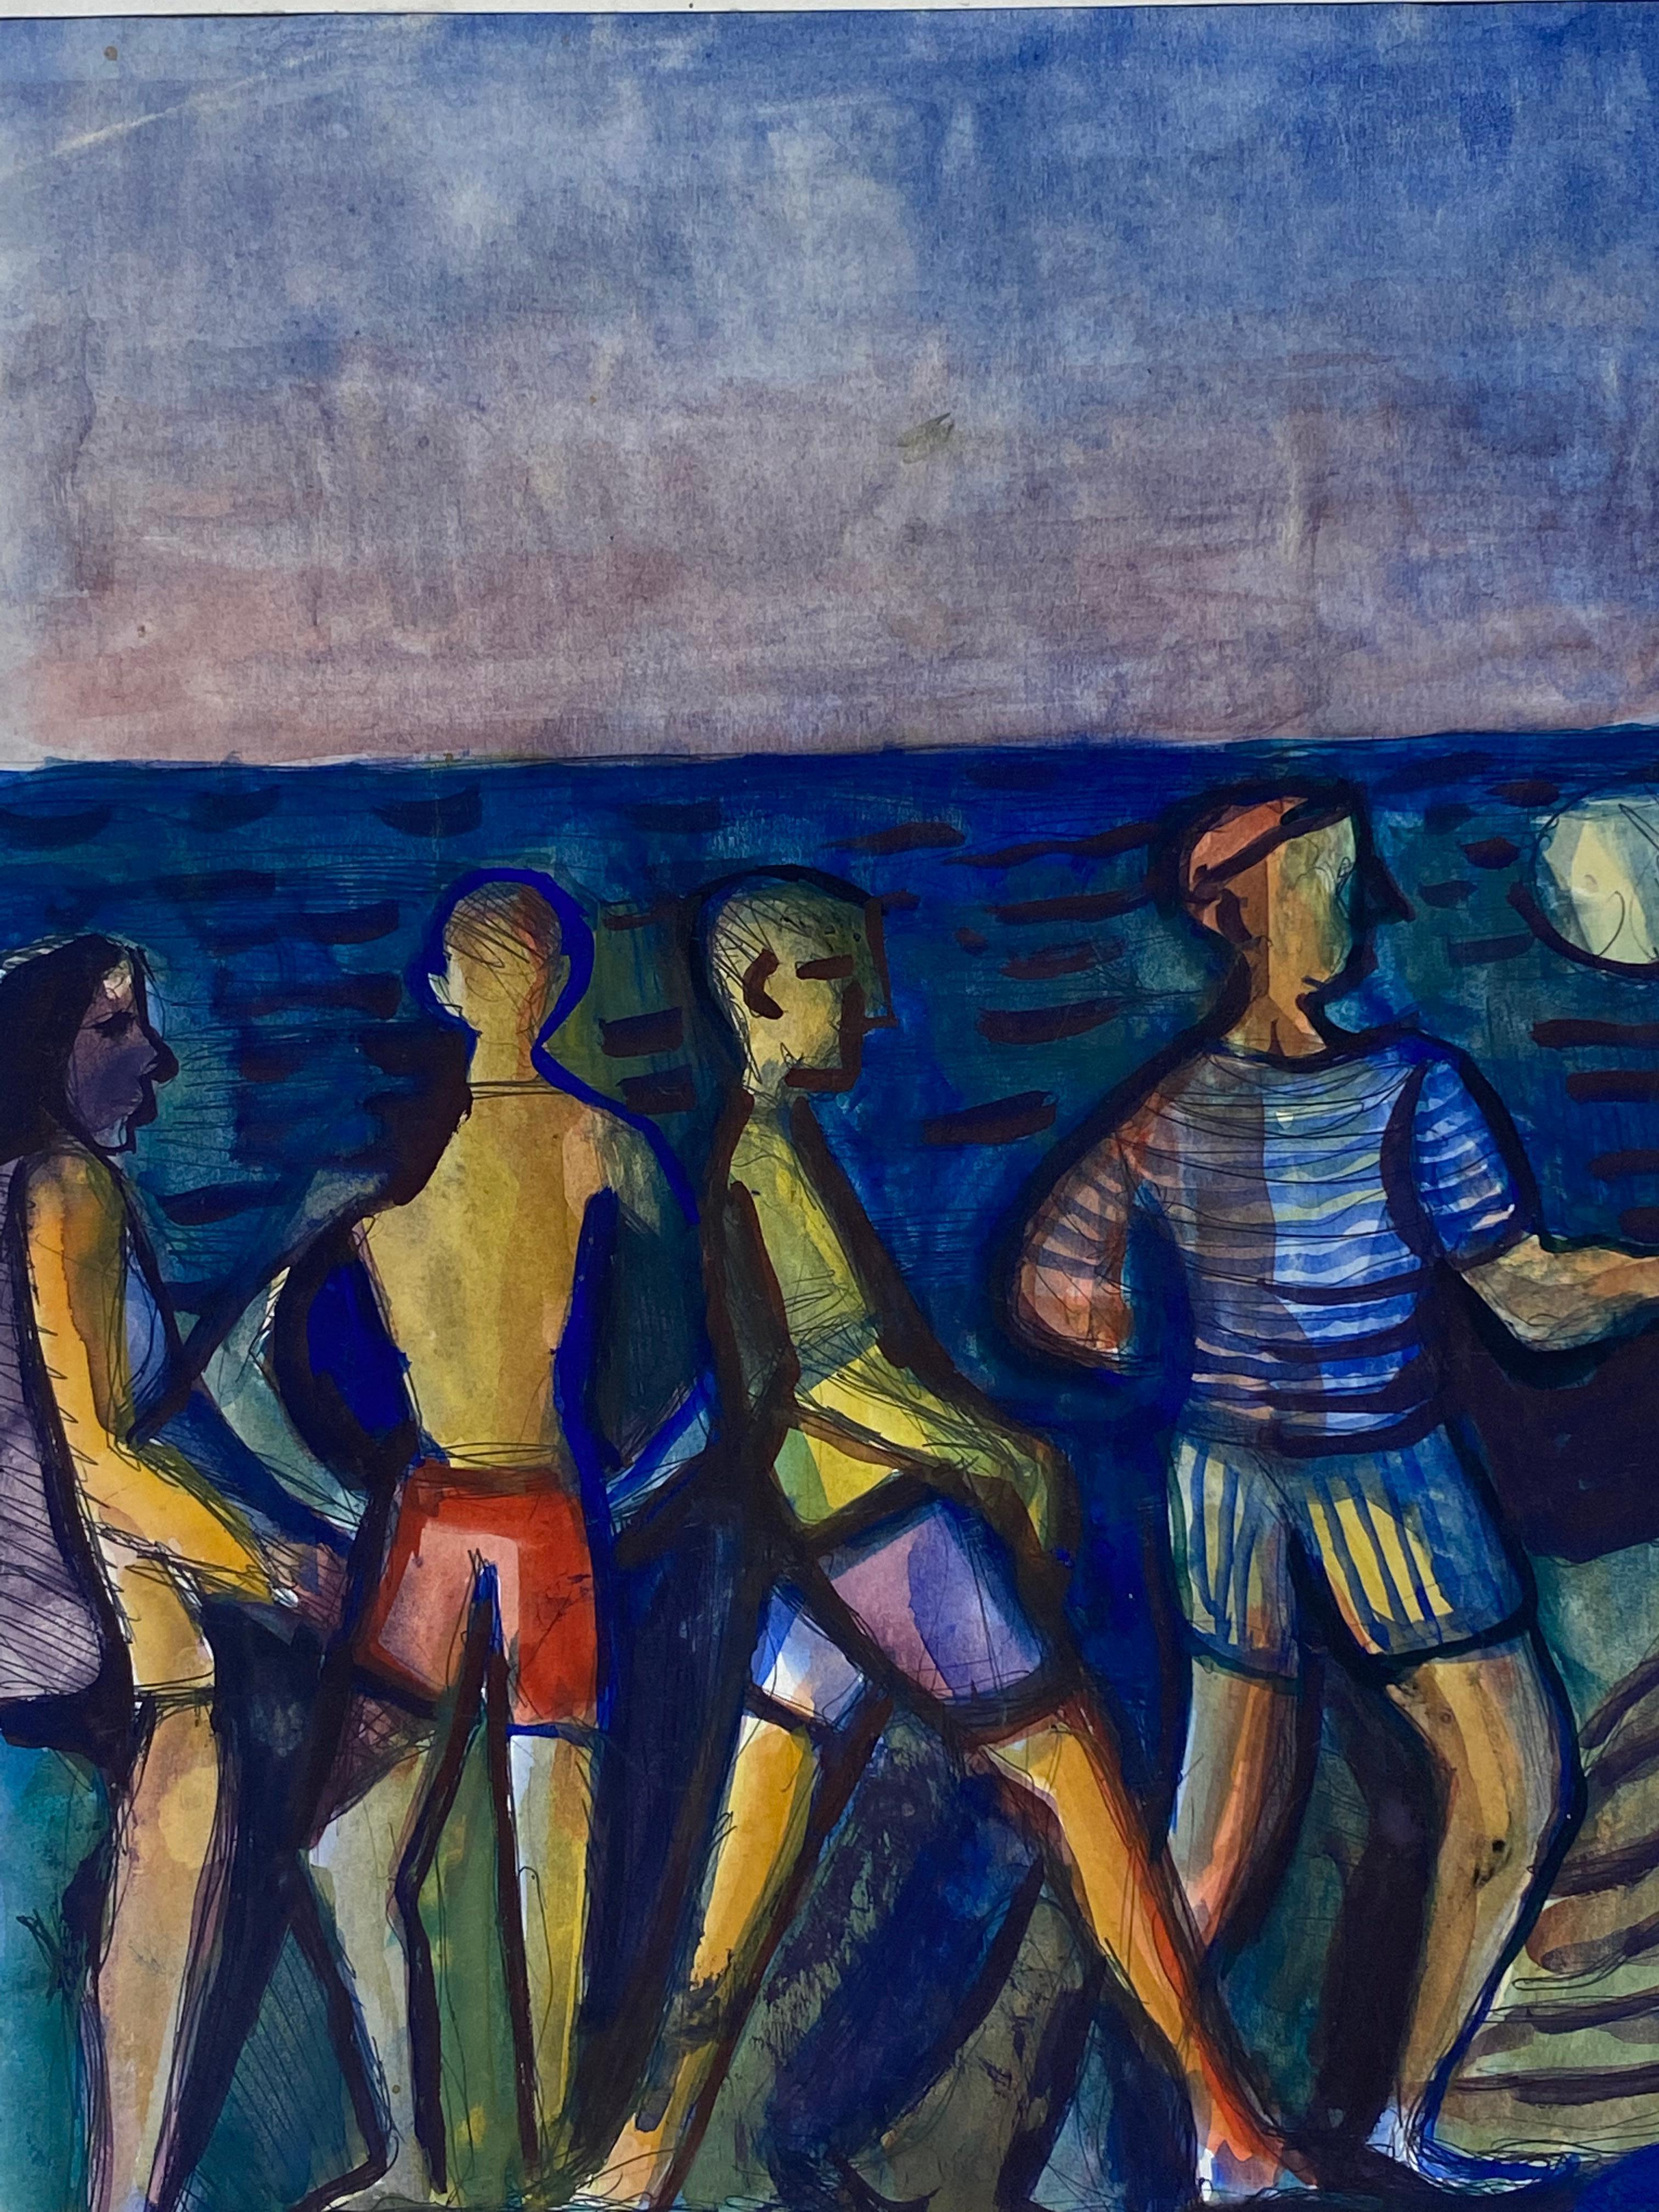 Unknown Figurative Painting - 1950's French Fauvist Painting - Fishermen Sailors on the Beach - Colourful